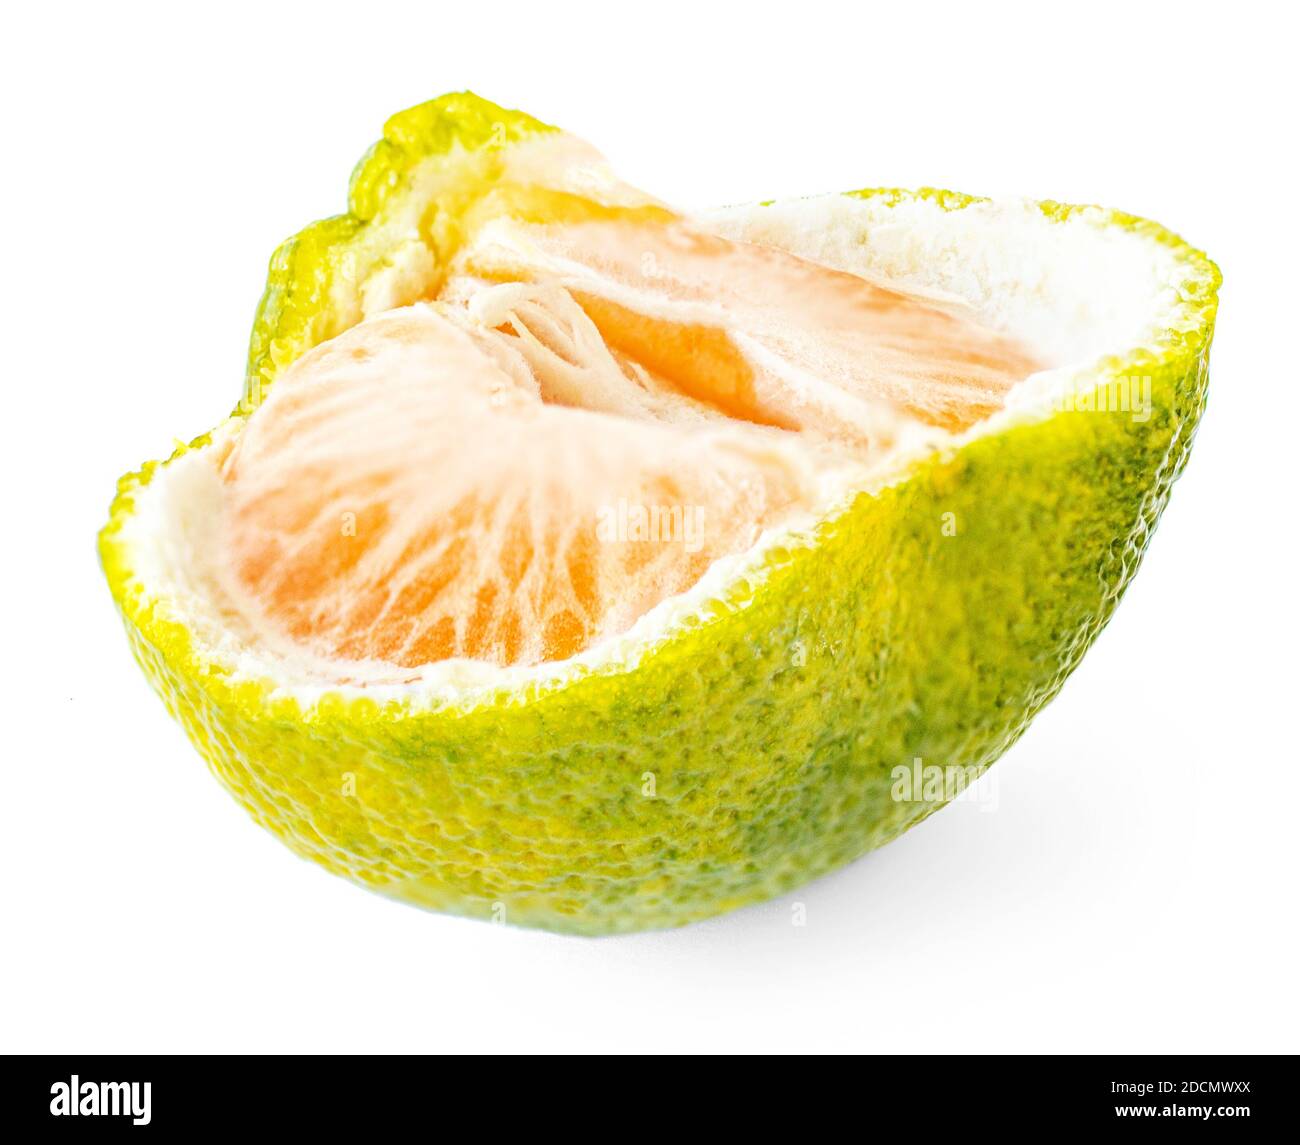 Tangerine or clementine fruit  slice with citrus peel  isolated on white background Stock Photo